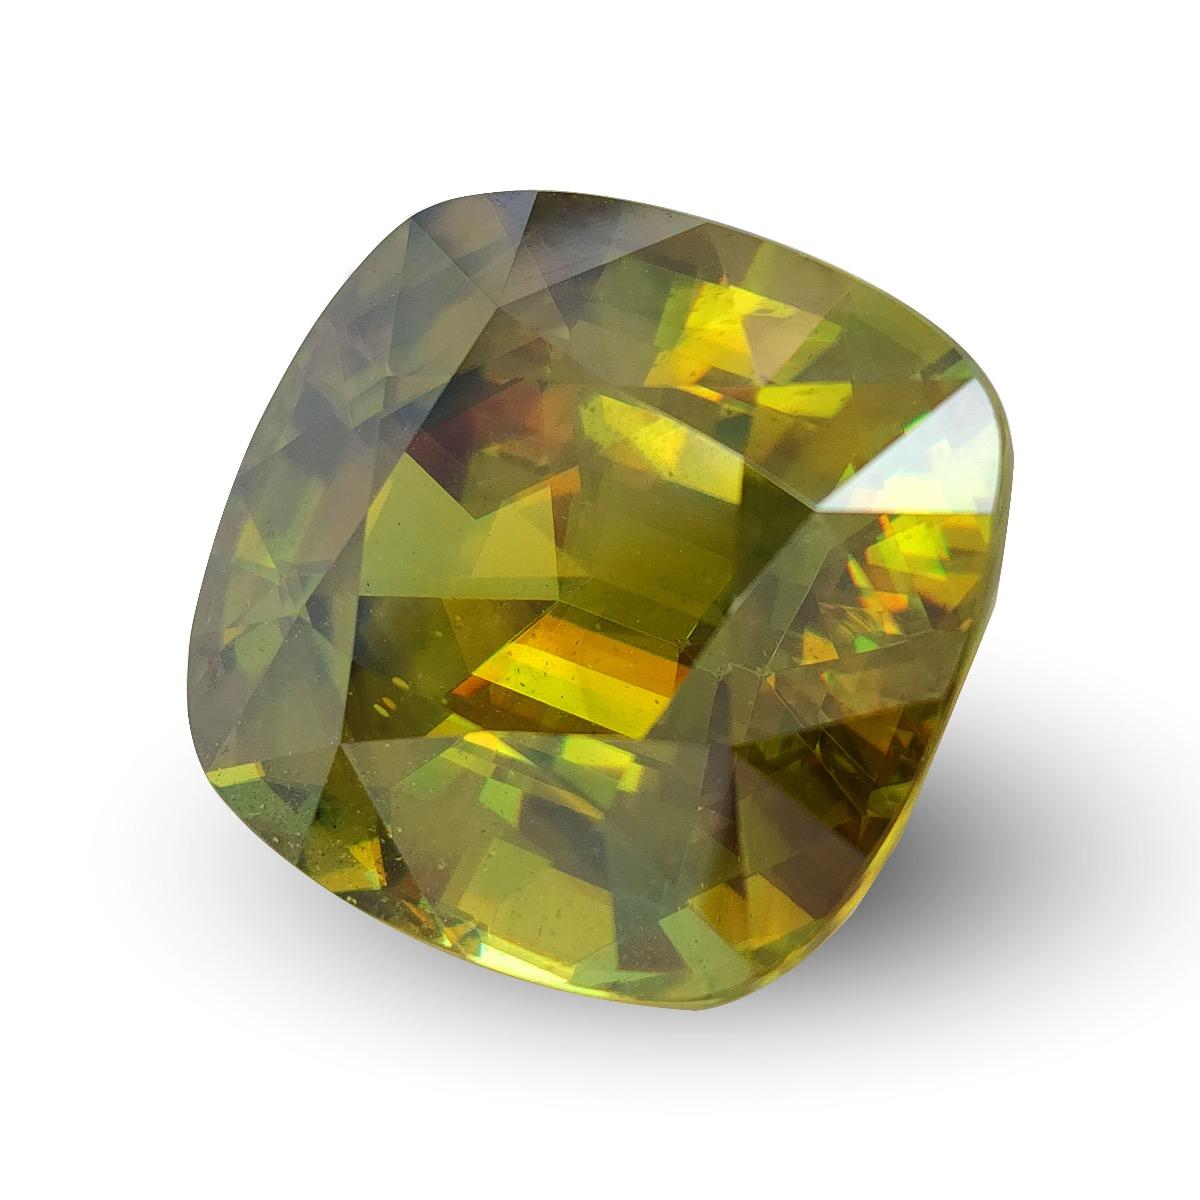 Please inquire for more videos/photos.

Details

Identification: Natural Sphene
• Carat: 38.08 carats
• Shape: Cushion
• Measurements: 20.34 x 19.15 x 12.70 mm
• Color: Yellowish Green
• Clarity: eye clean
• Origin: Madagascar